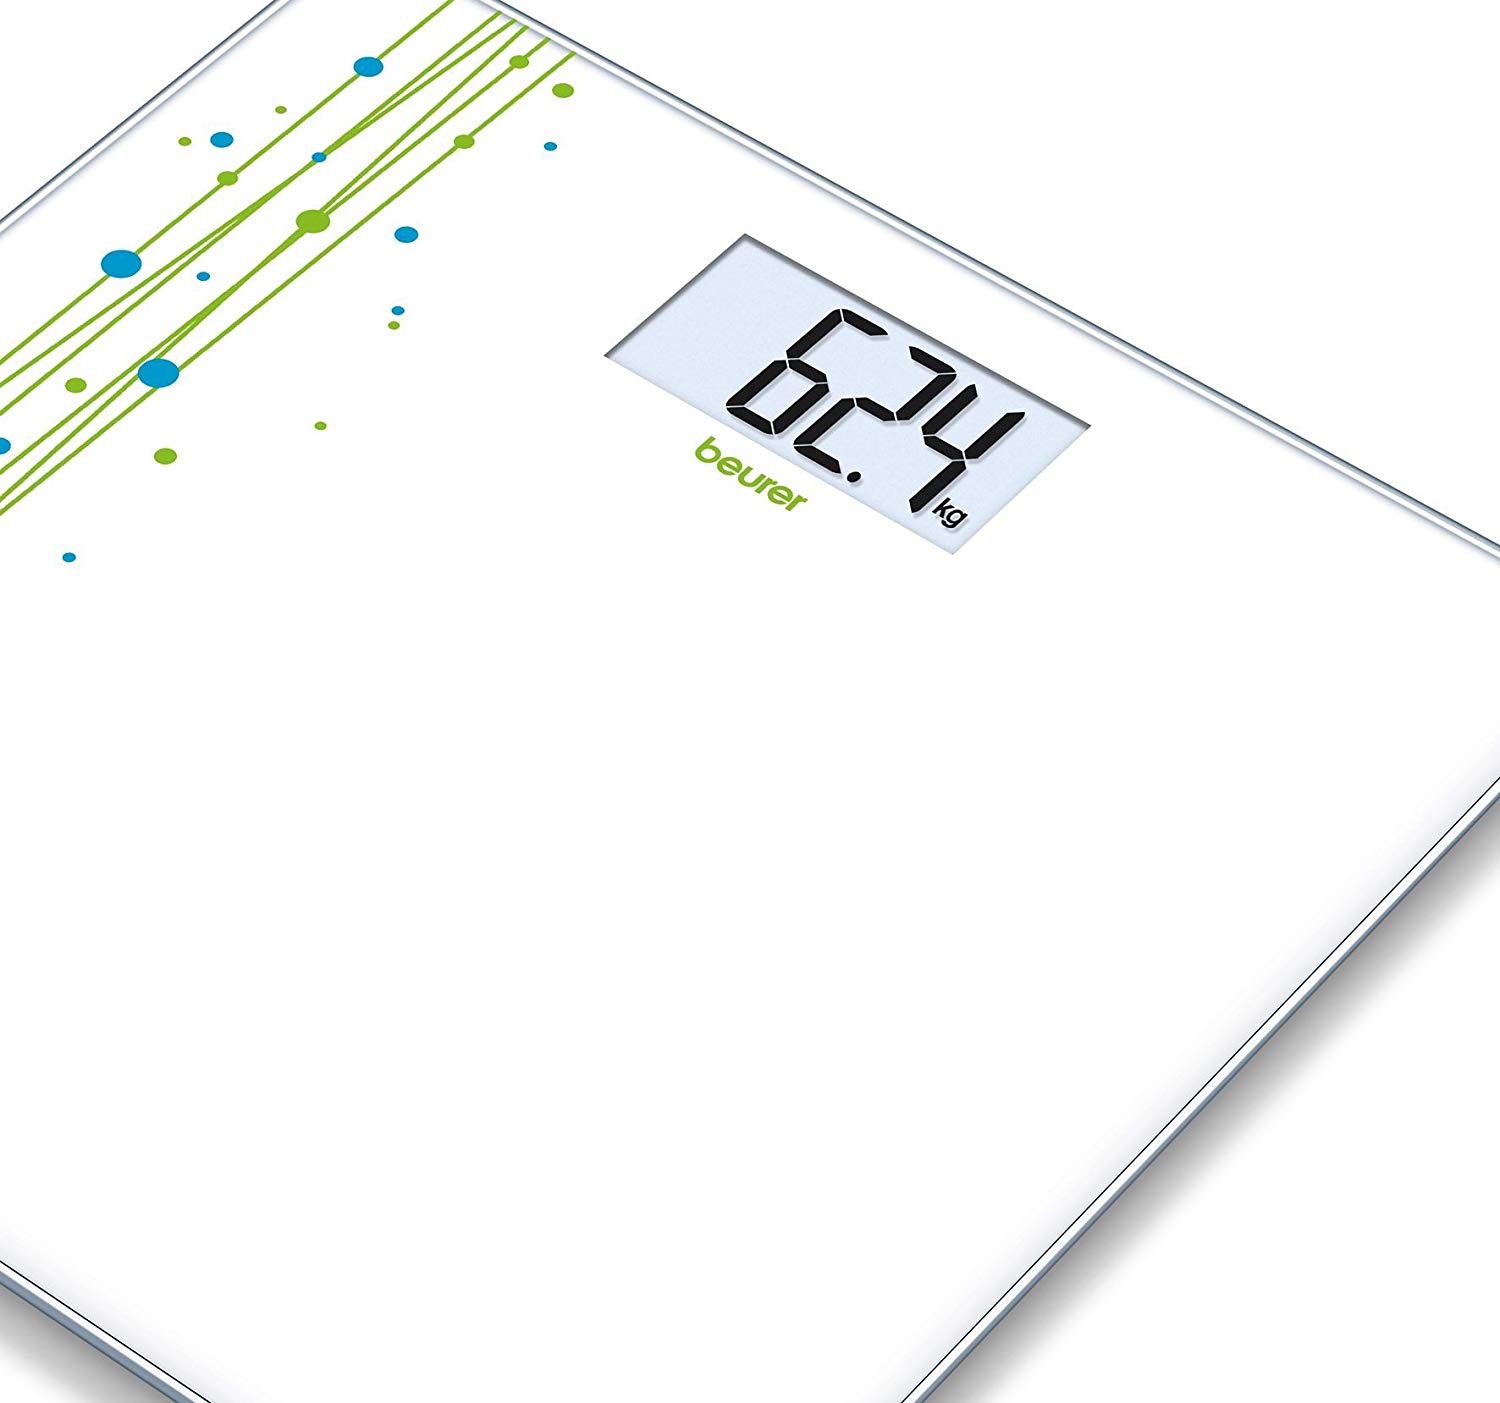 Beurer Gs201 Designer Glass Scale | Wellcare Online Pharmacy - Qatar | Buy  Medicines, Beauty, Hair & Skin Care products and more | WellcareOnline.com